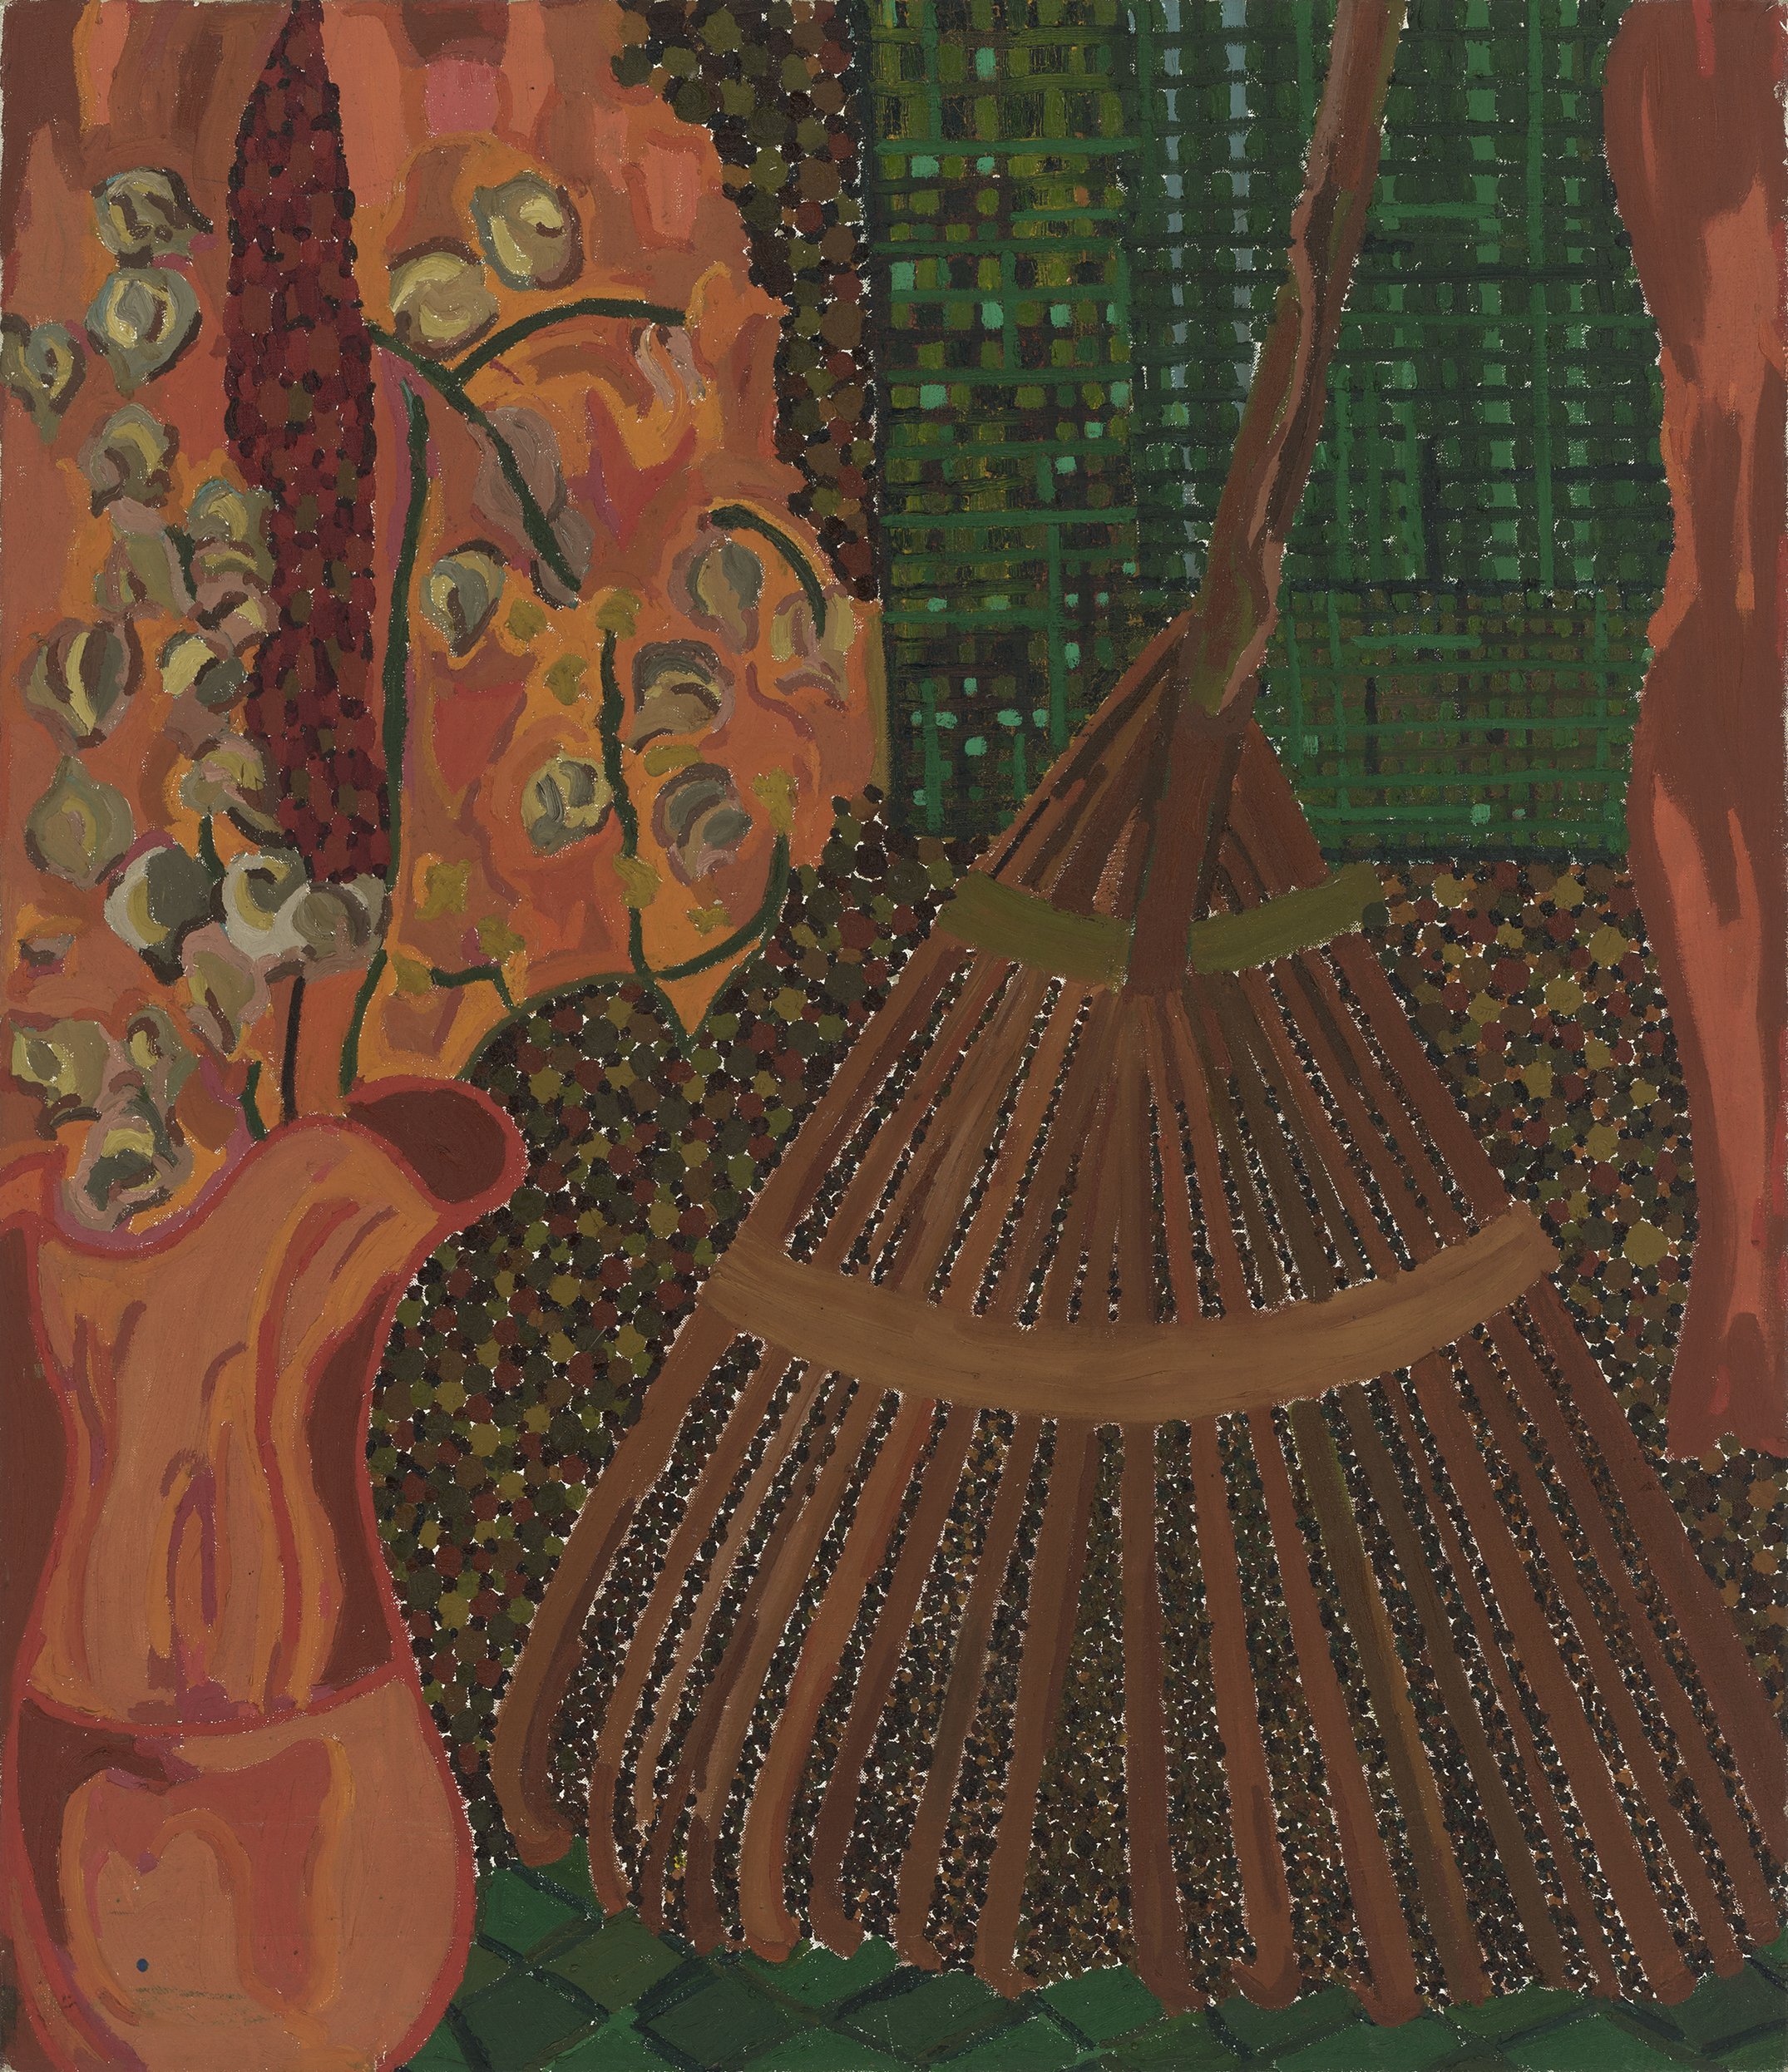 Abstract still-life of a brown rake and coral pitcher with flora on a patterned background of greens, oranges, and browns.